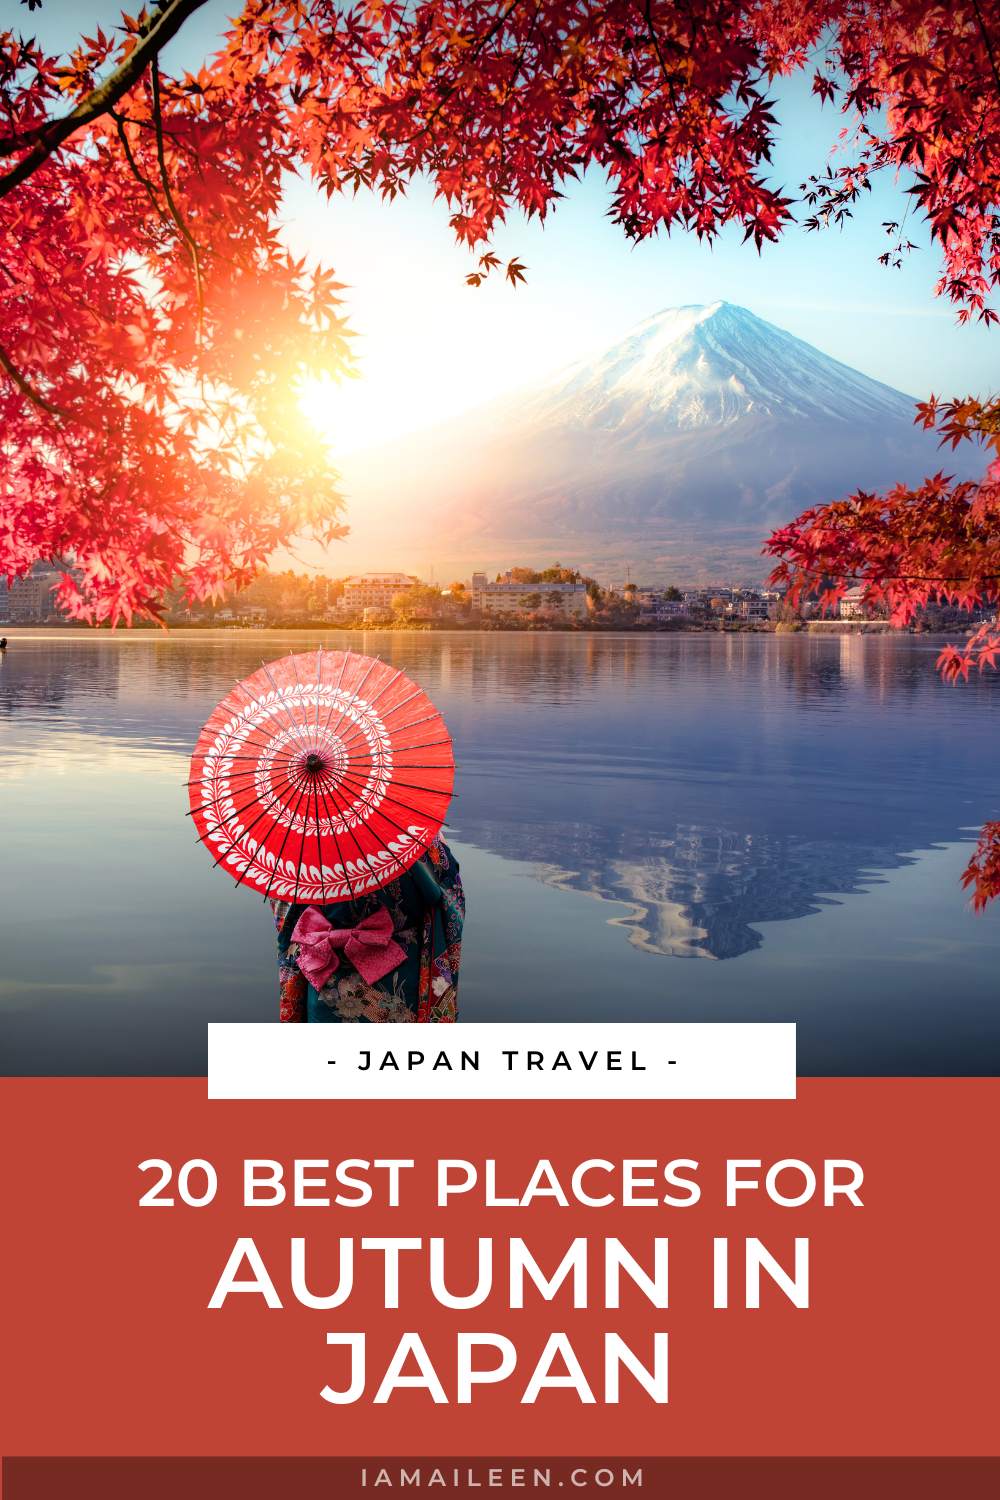 20 Best Spots for Autumn in Japan: Top Places for Fall Foliage Viewing